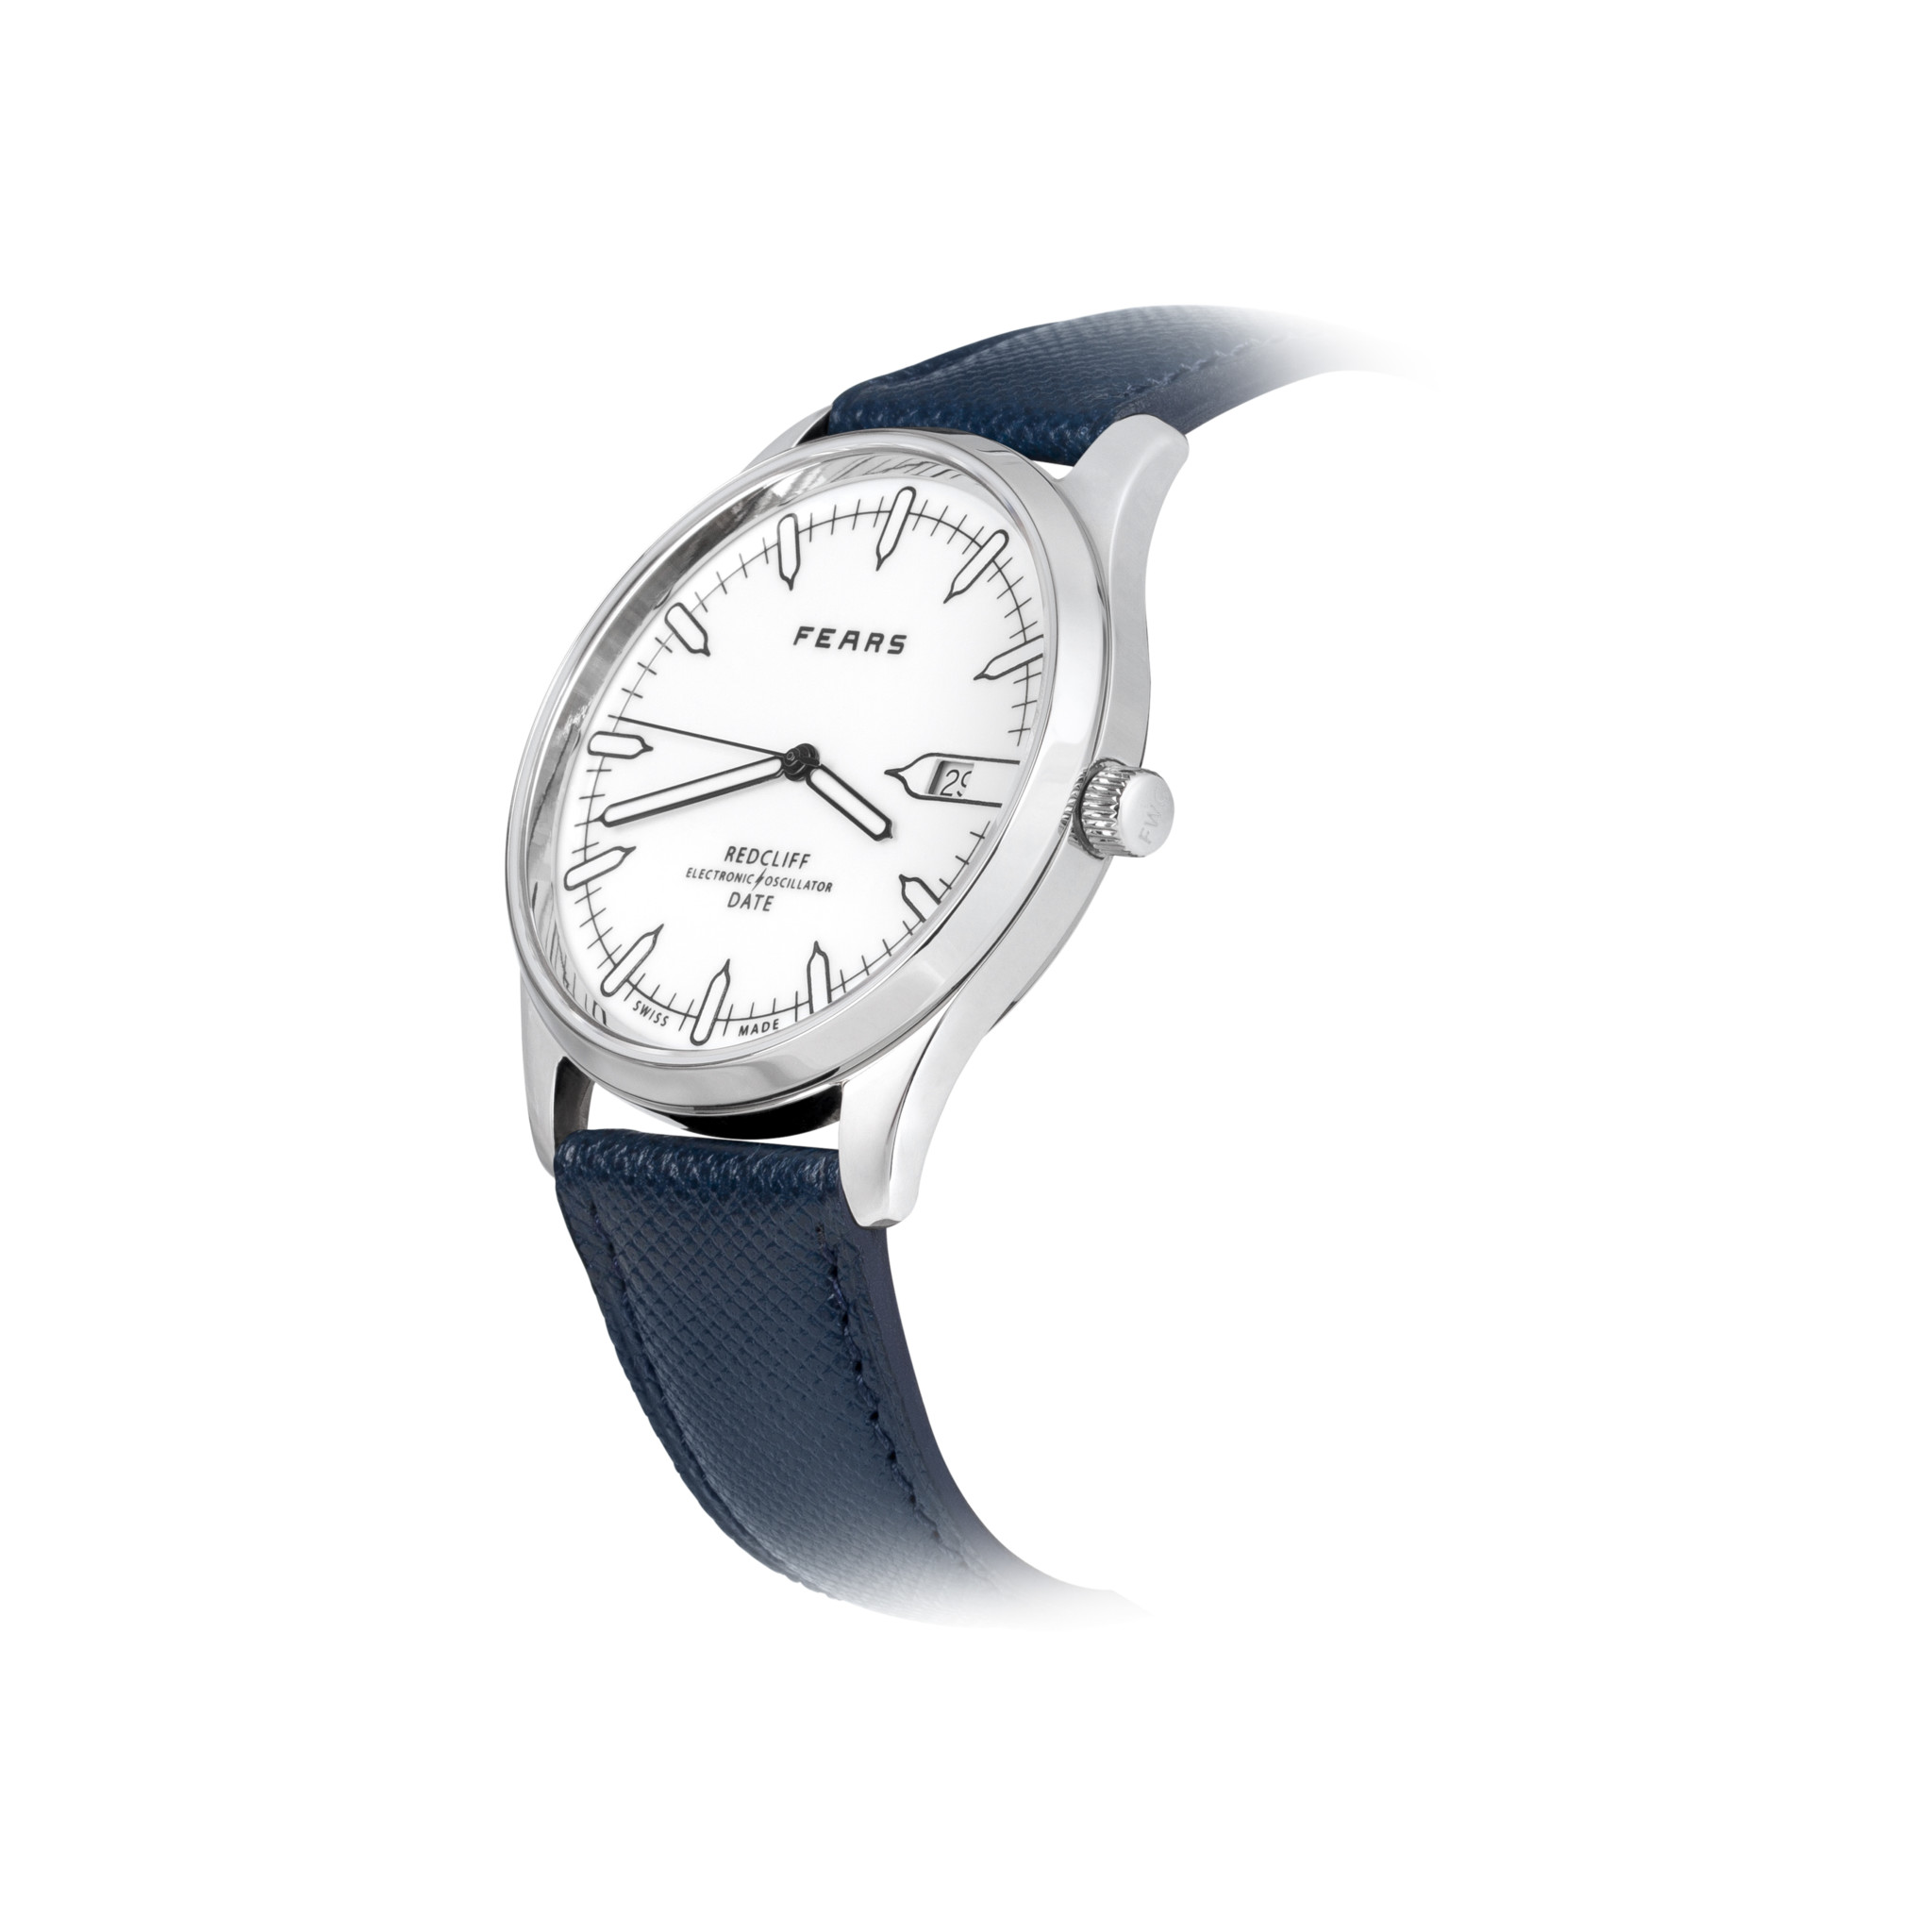 Fears redcliff date angled jetliner white dial on fears blue strap